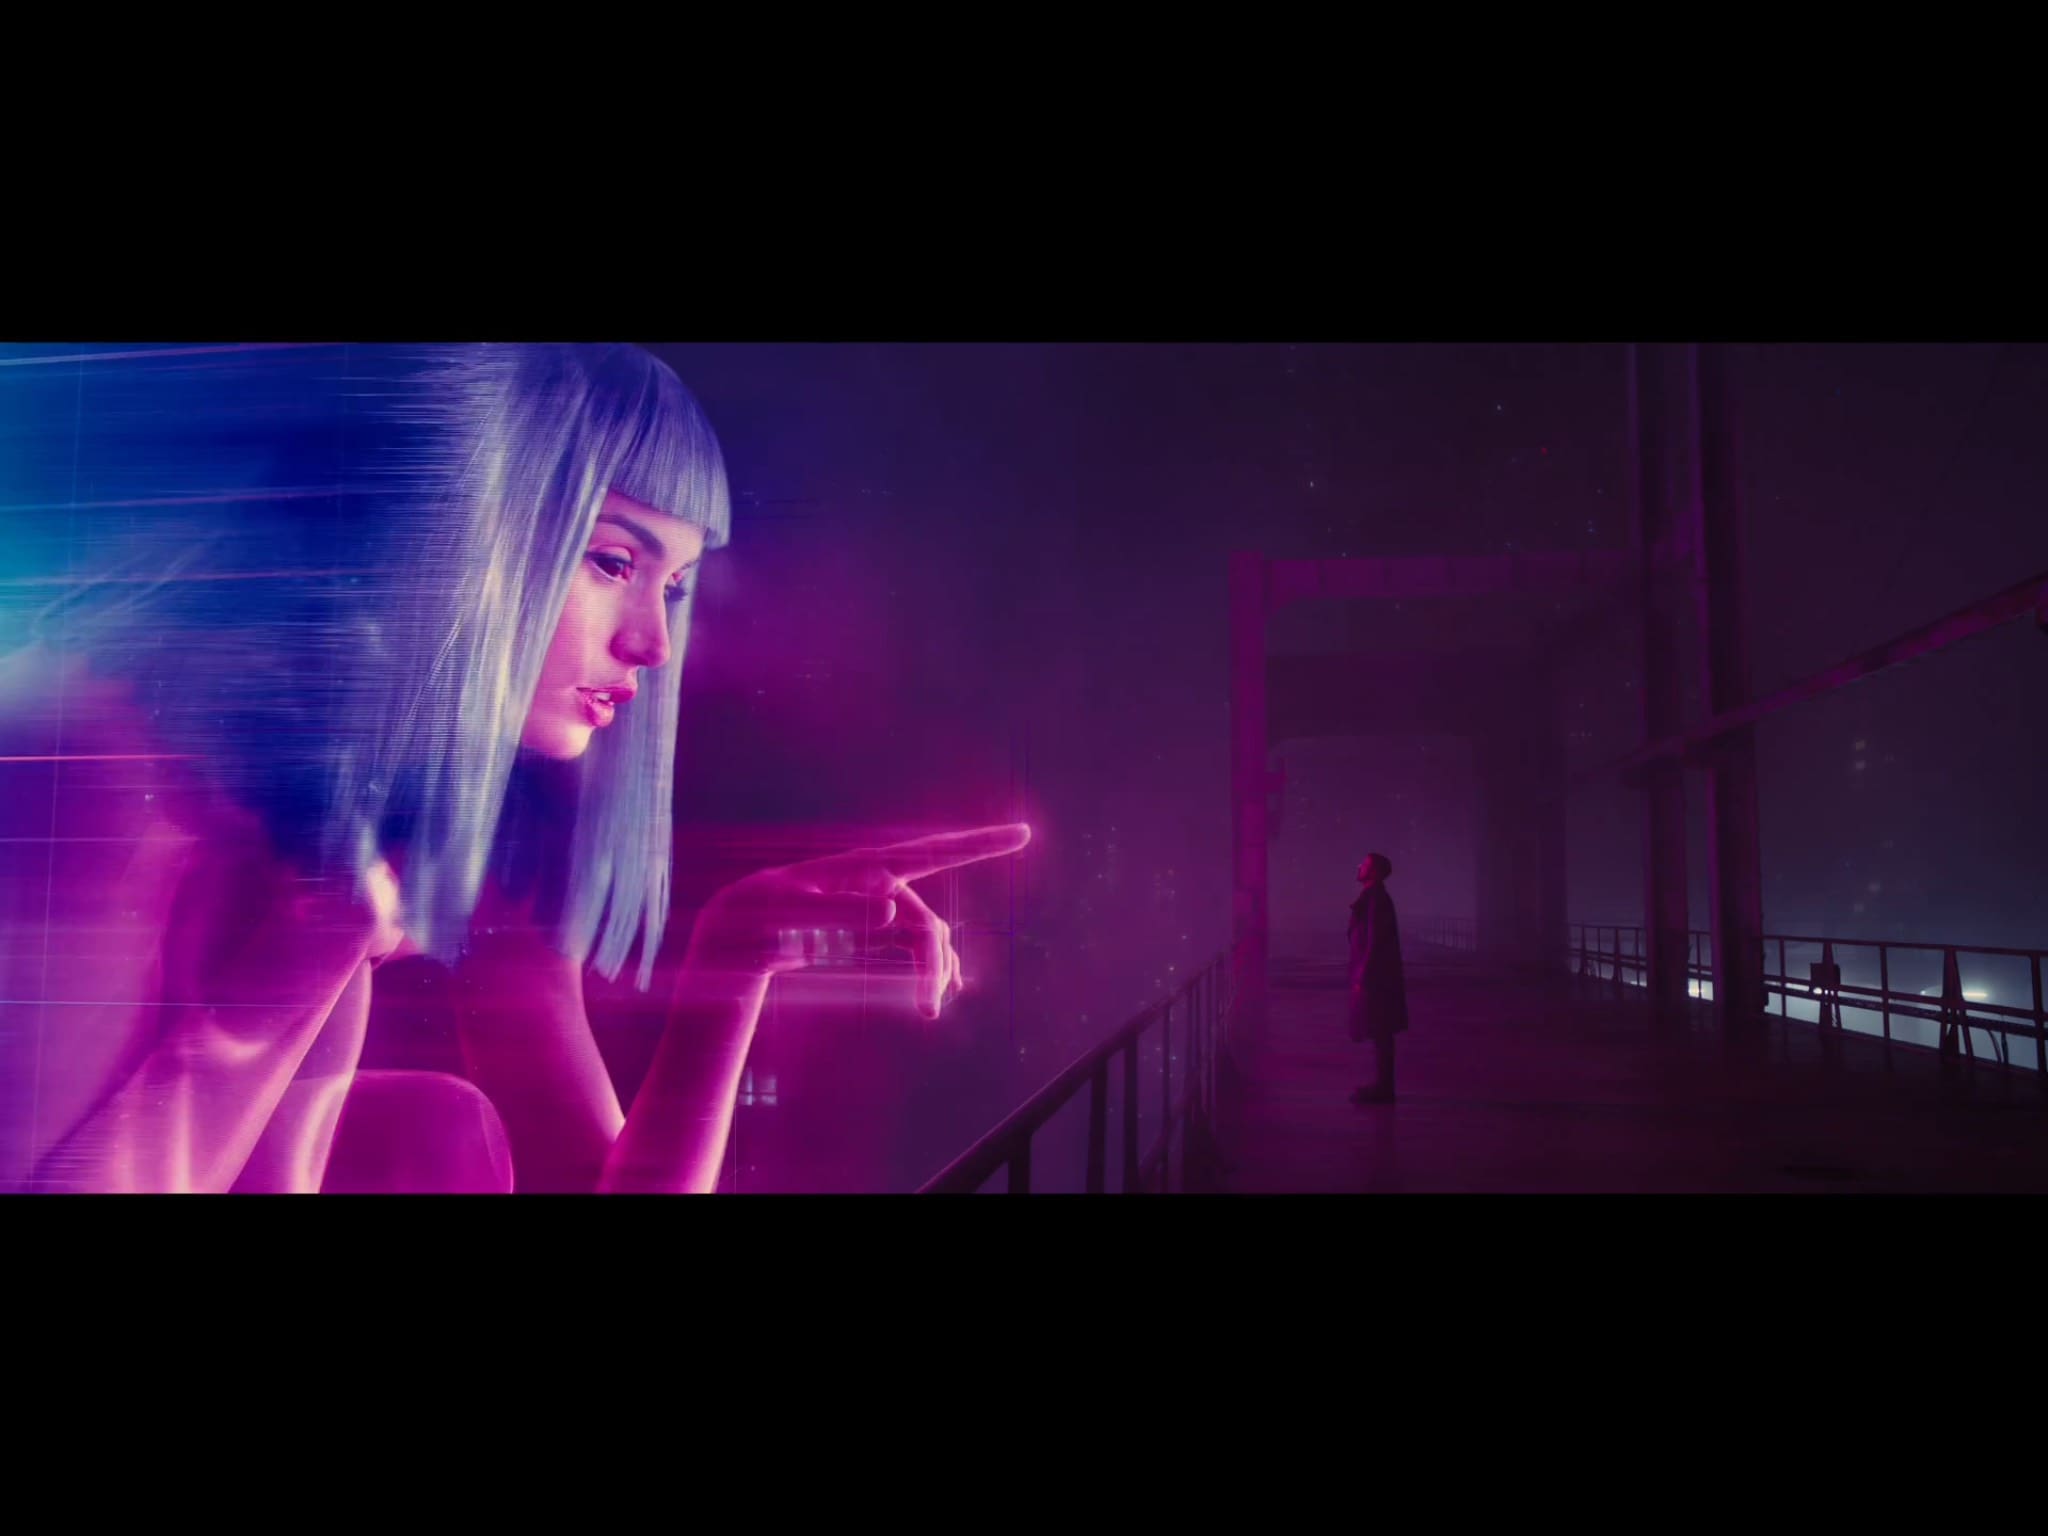 Movie review: 'Blade Runner' sequel is another stunning